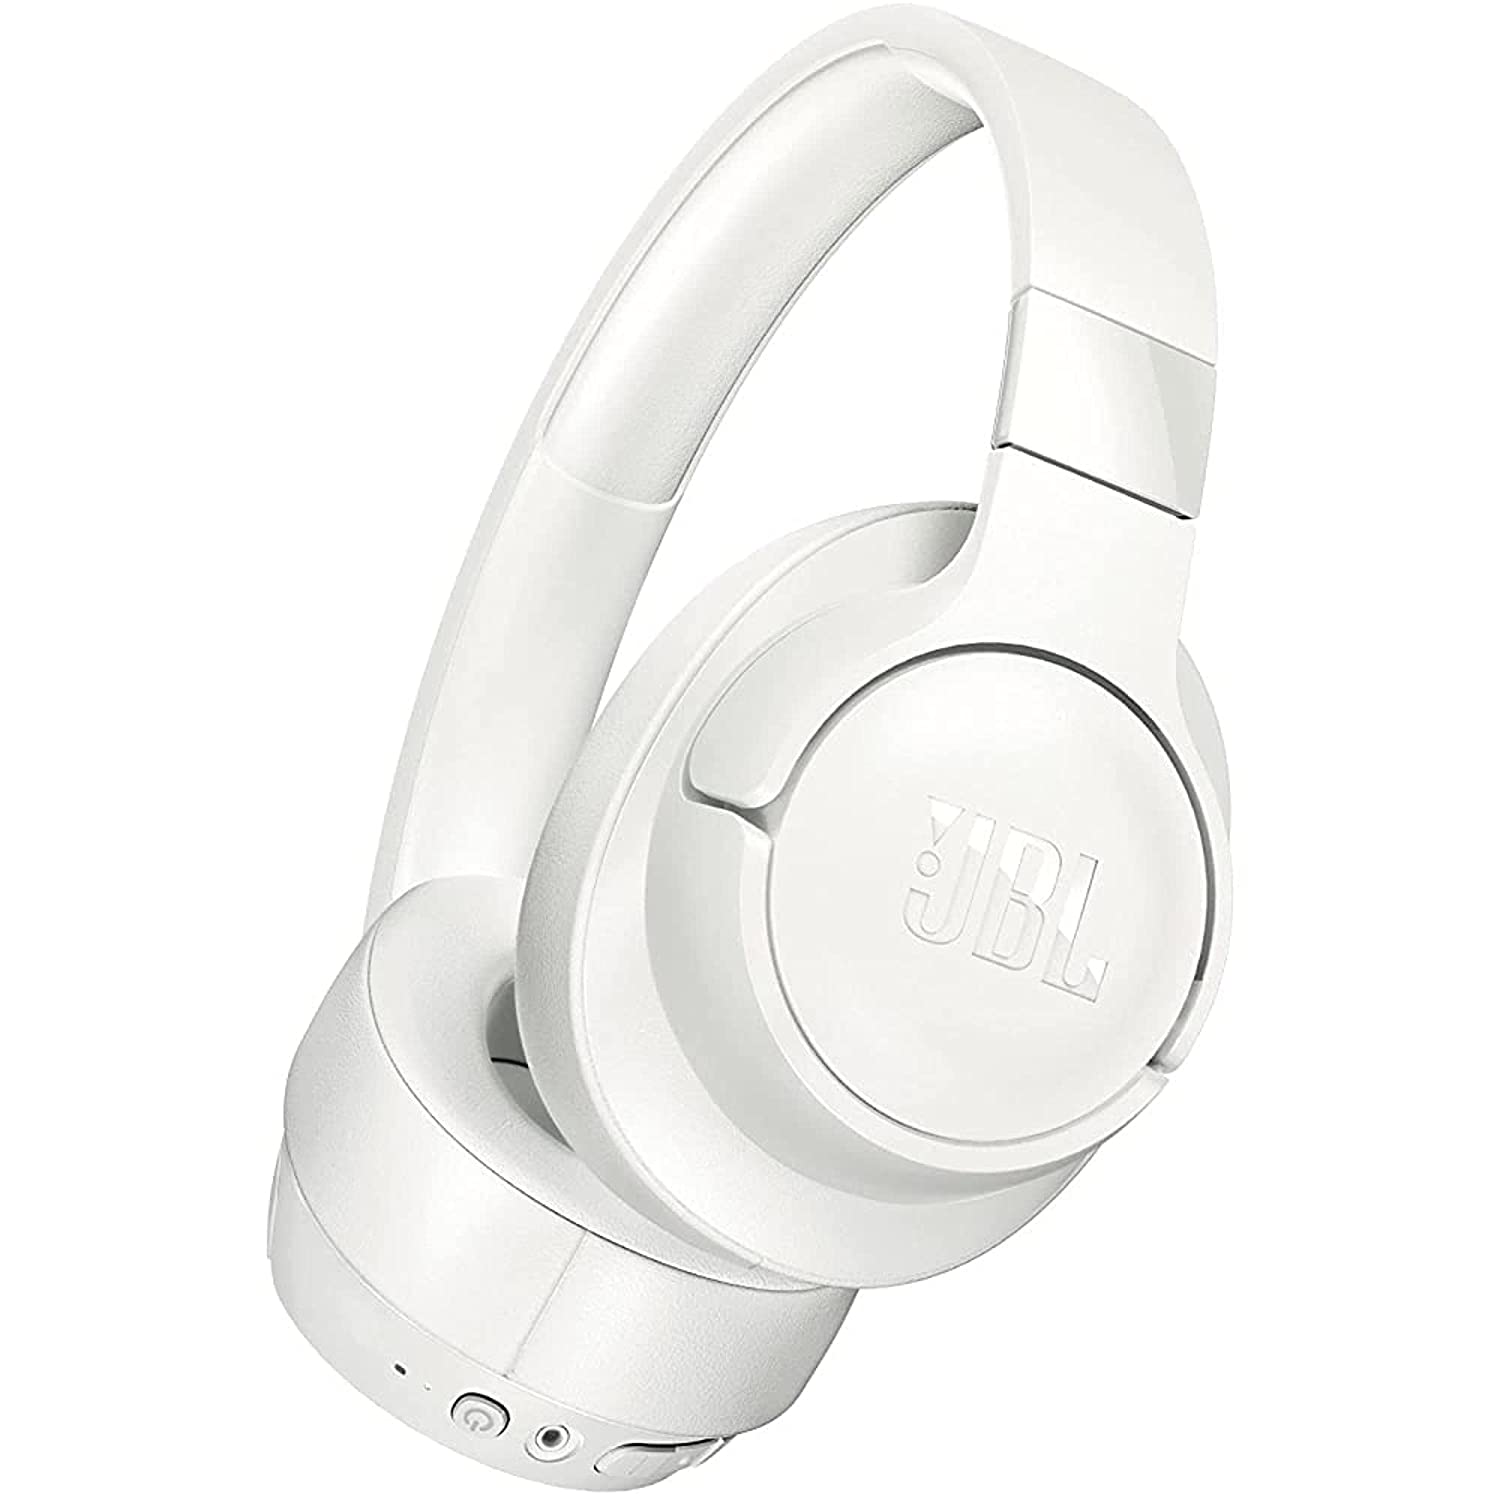 JBL Tune 760NC On-Ear Wireless Noise Cancelling Headphone Bundle with